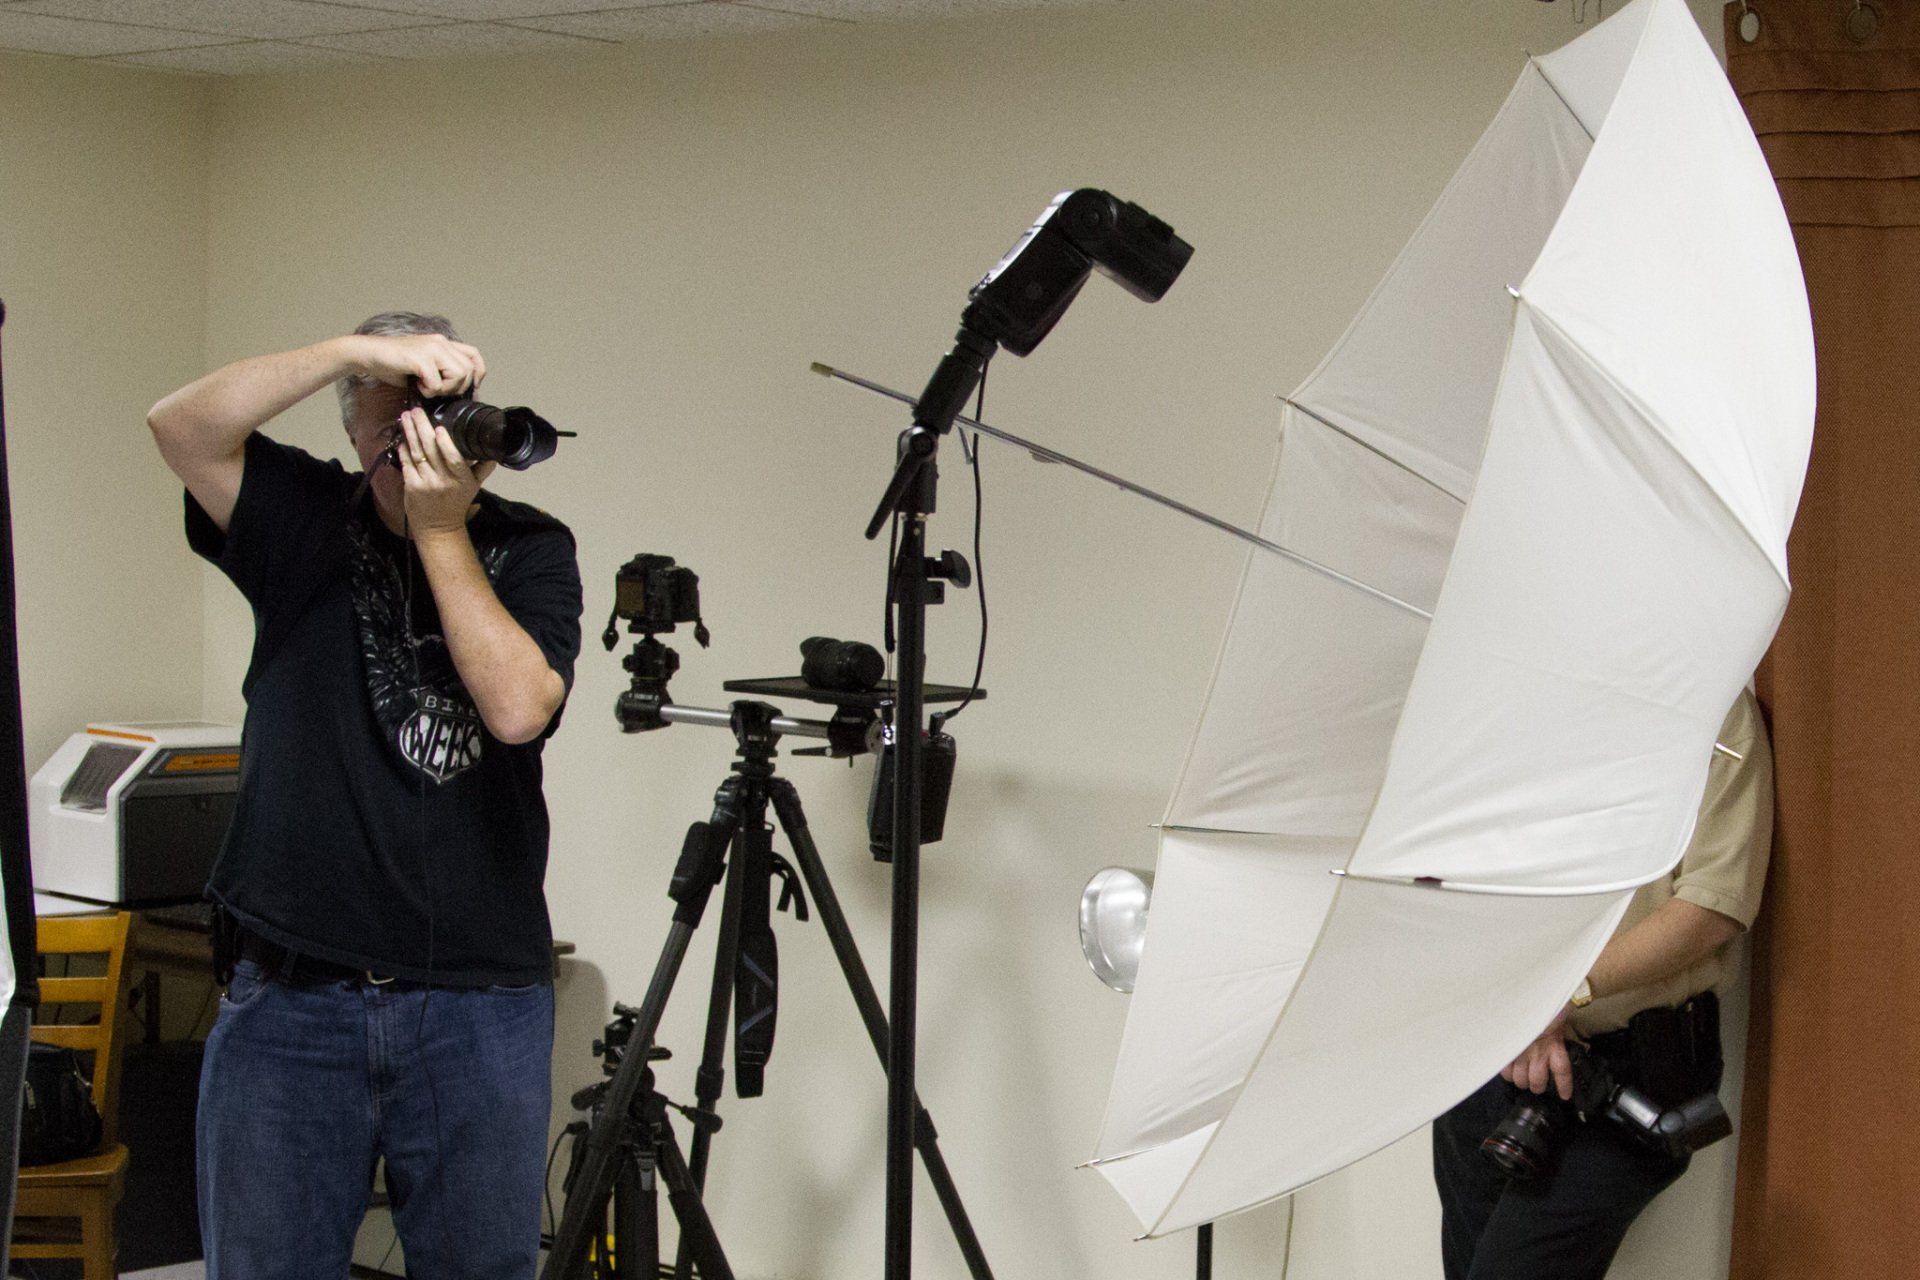 A photographer taking pictures in a studio with lighting equipment